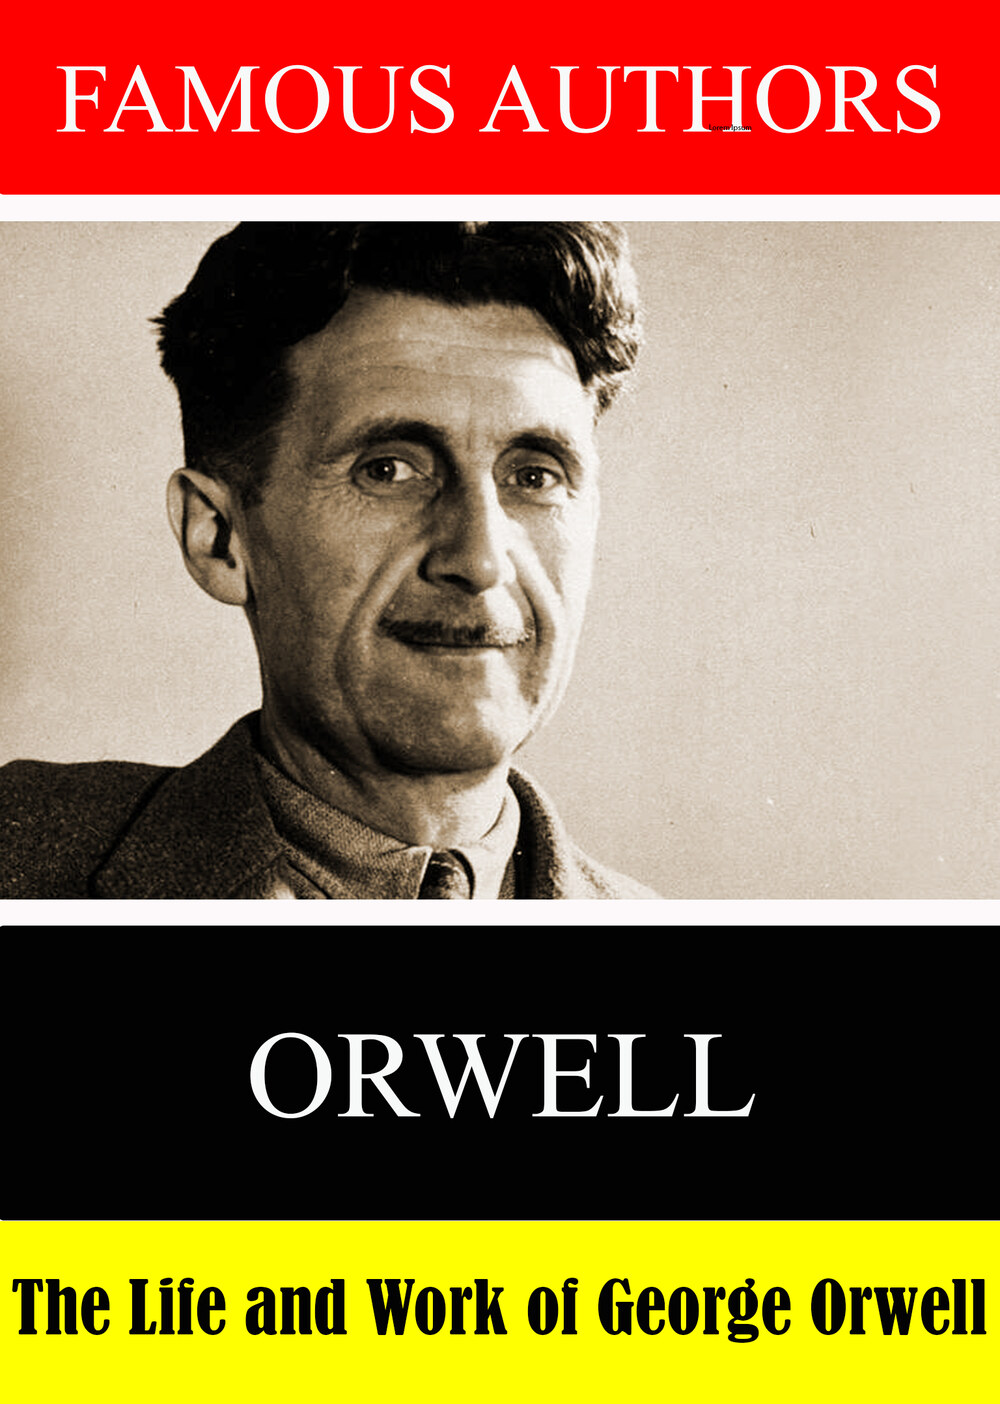 L7900 - Famous Authors:  The Life and Work of George Orwell